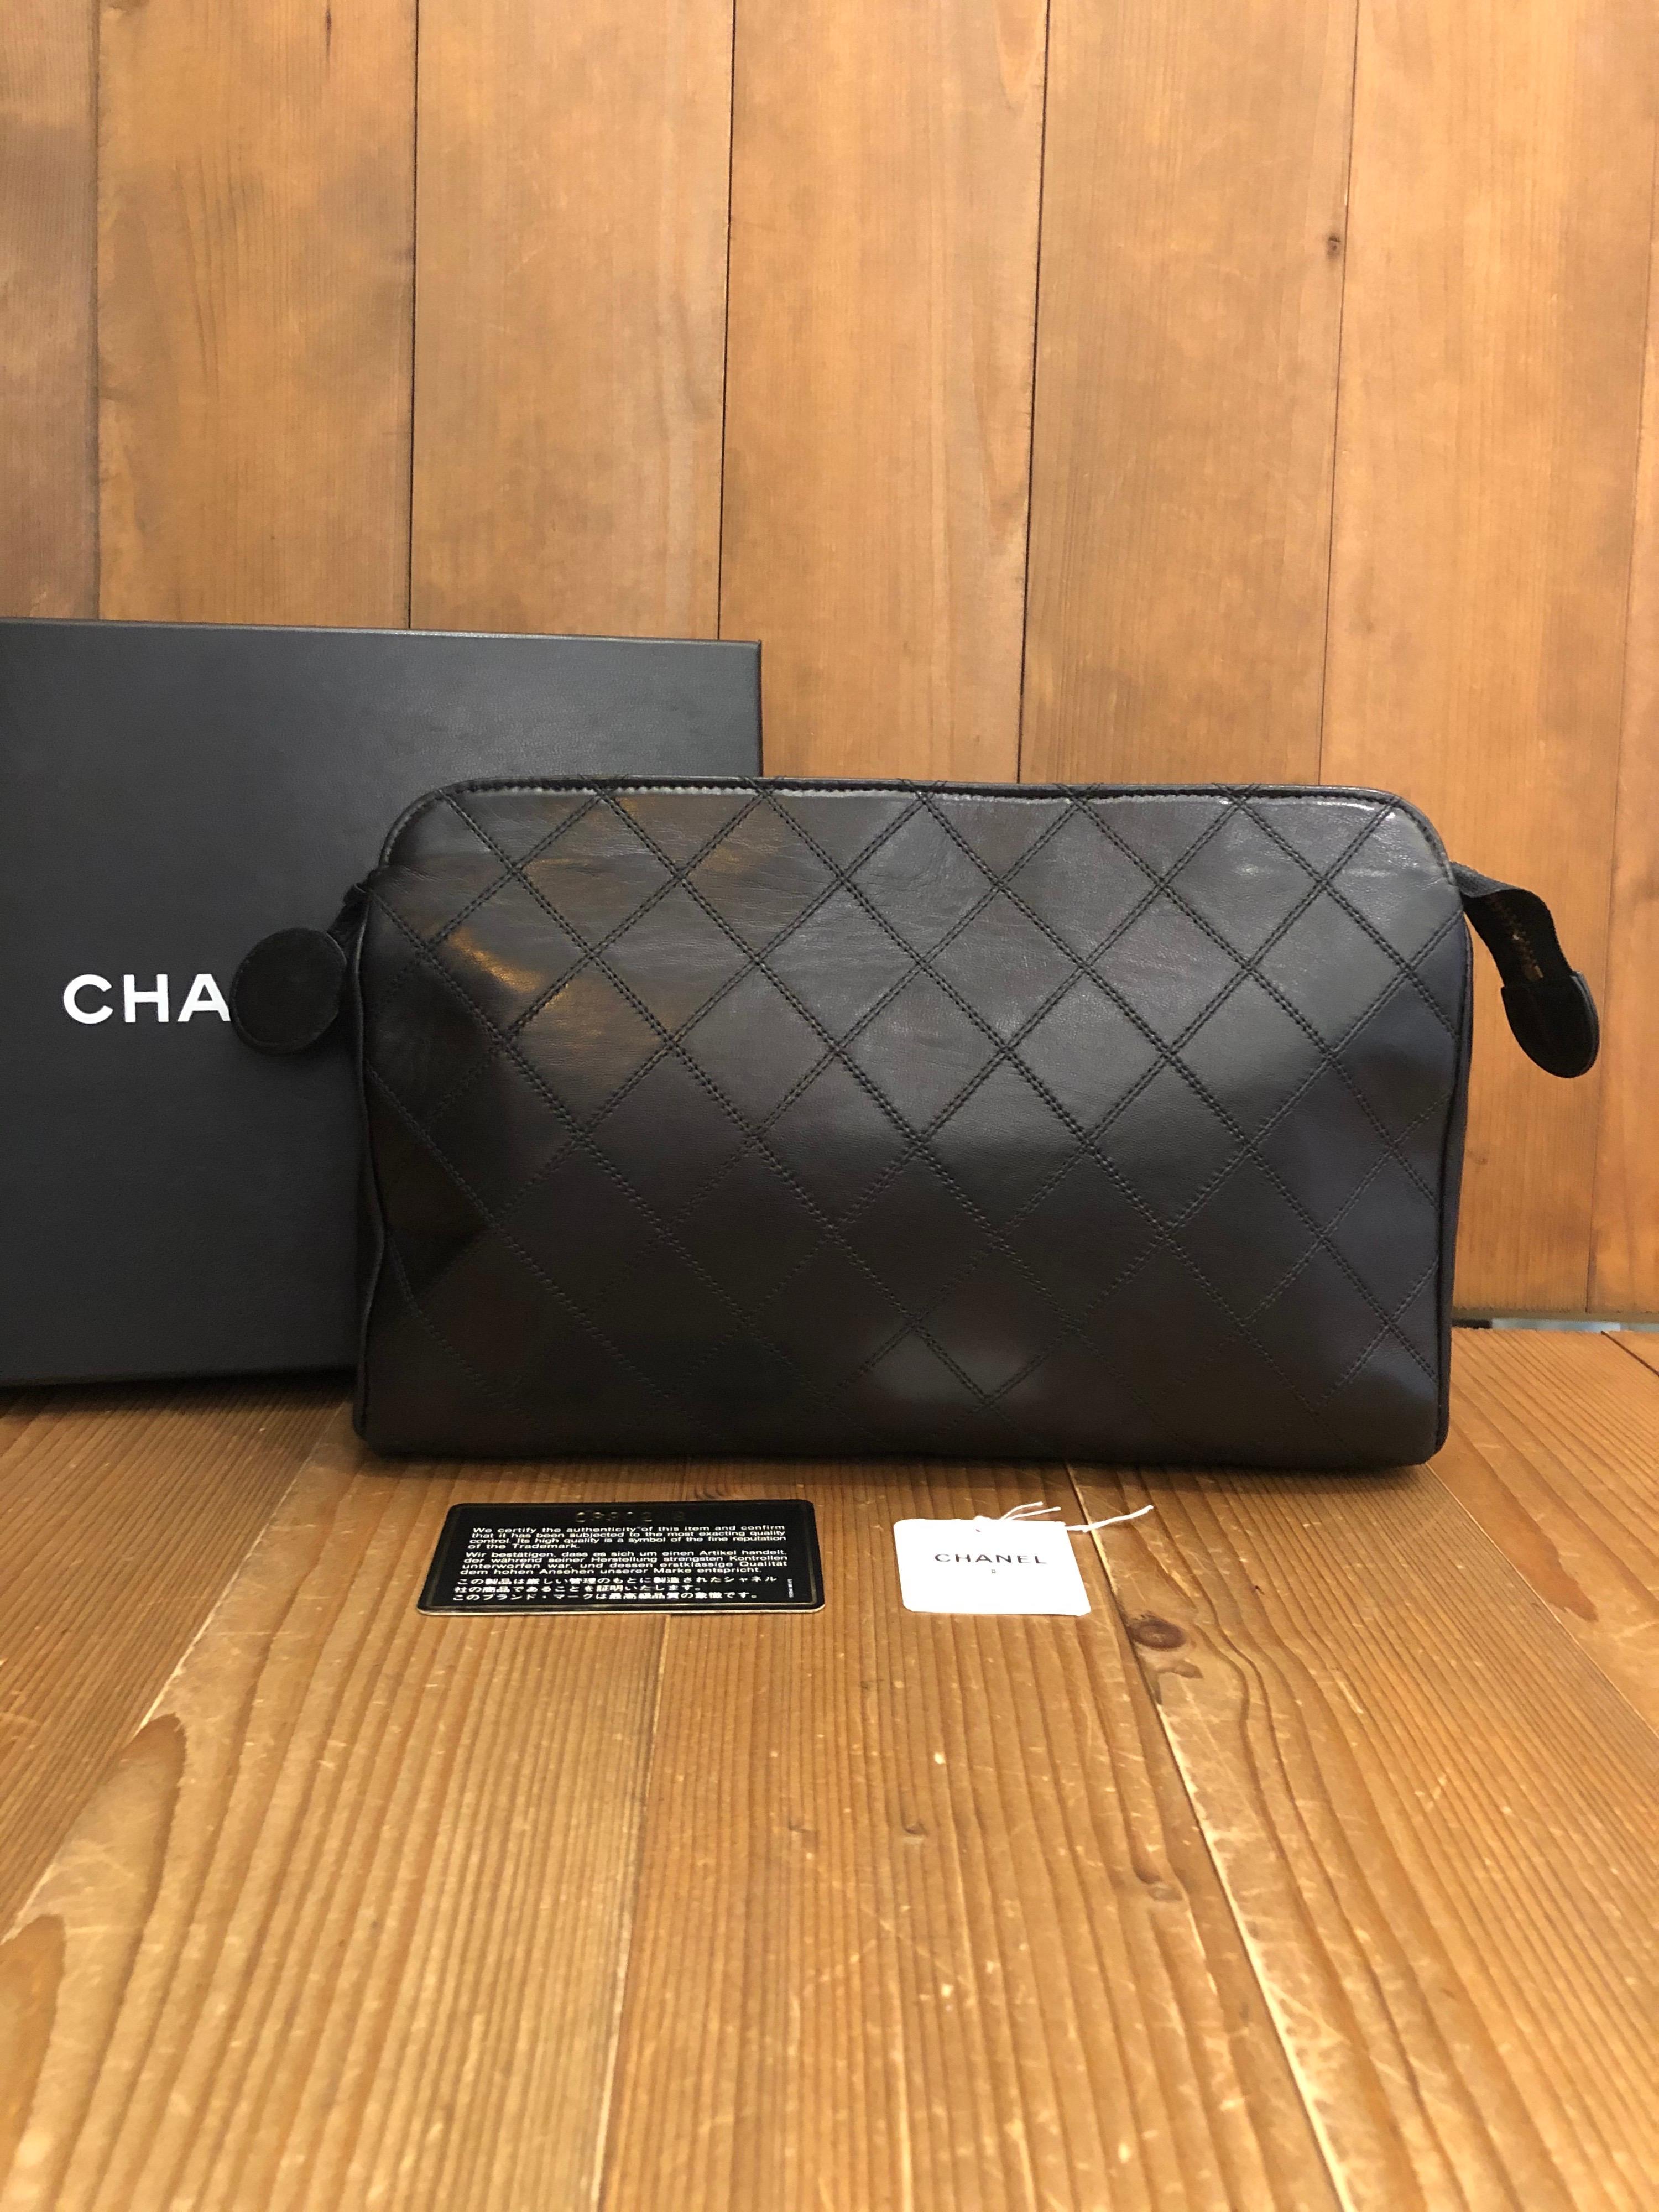 Authentic Chanel Clutch in black quilted Lambskin. Interior fully refurbished by Chanel store. Original tags preserved but serial sticker removed. Comes with original Chanel box.

Material: Lambskin leather 
Color: Black
Origin: France